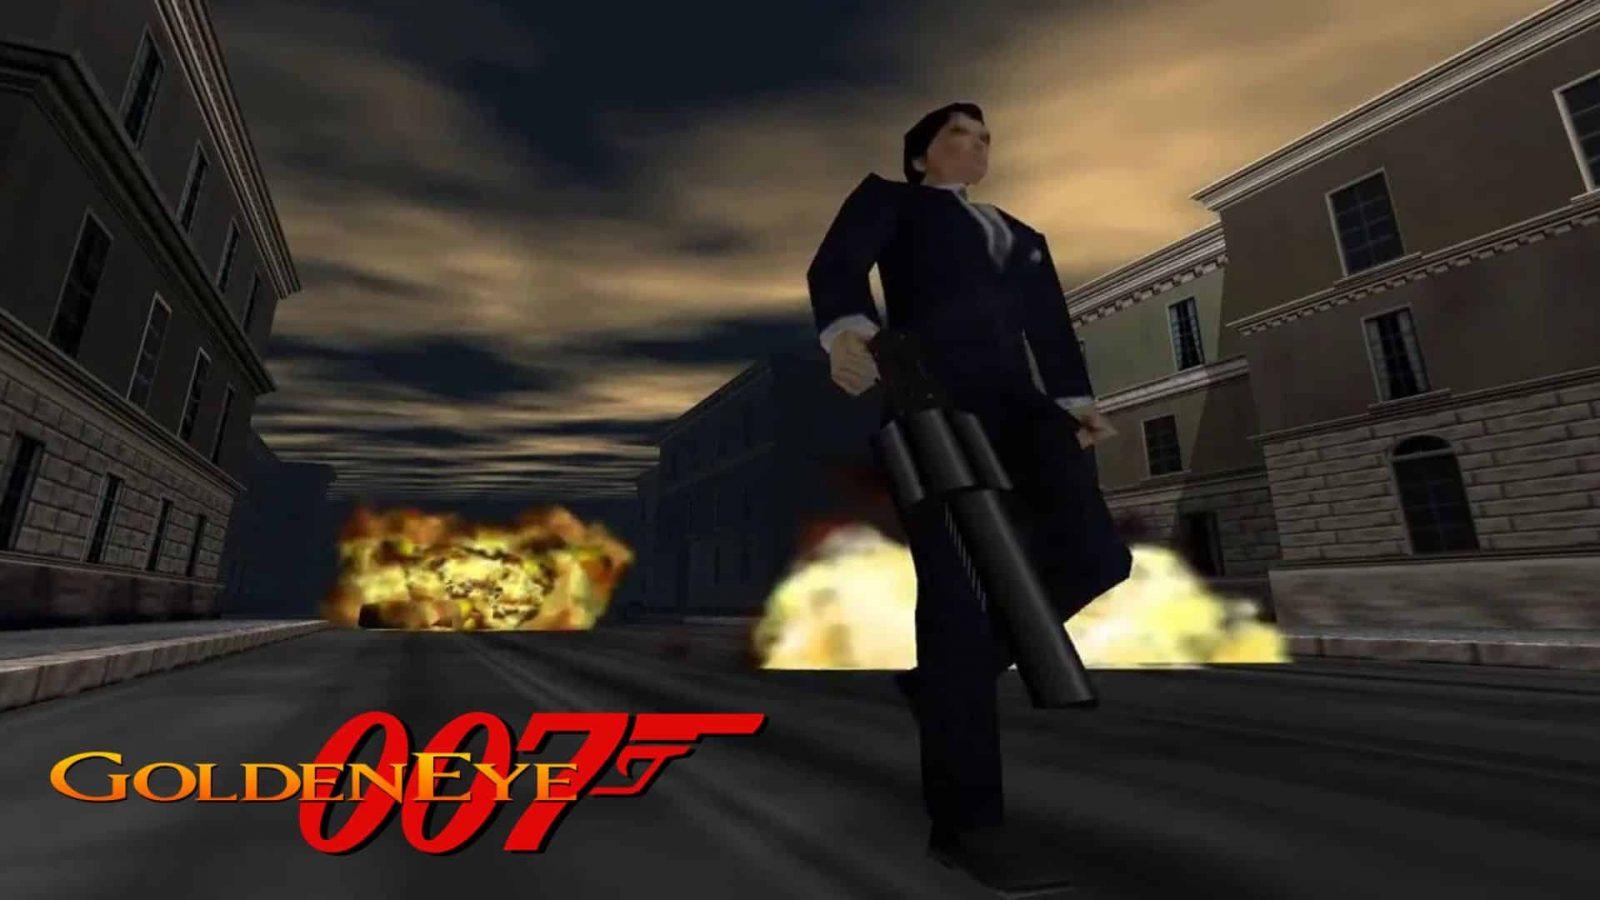 GoldenEye Xbox Remaster Leaks, Is Fully Playable On PC - GameSpot